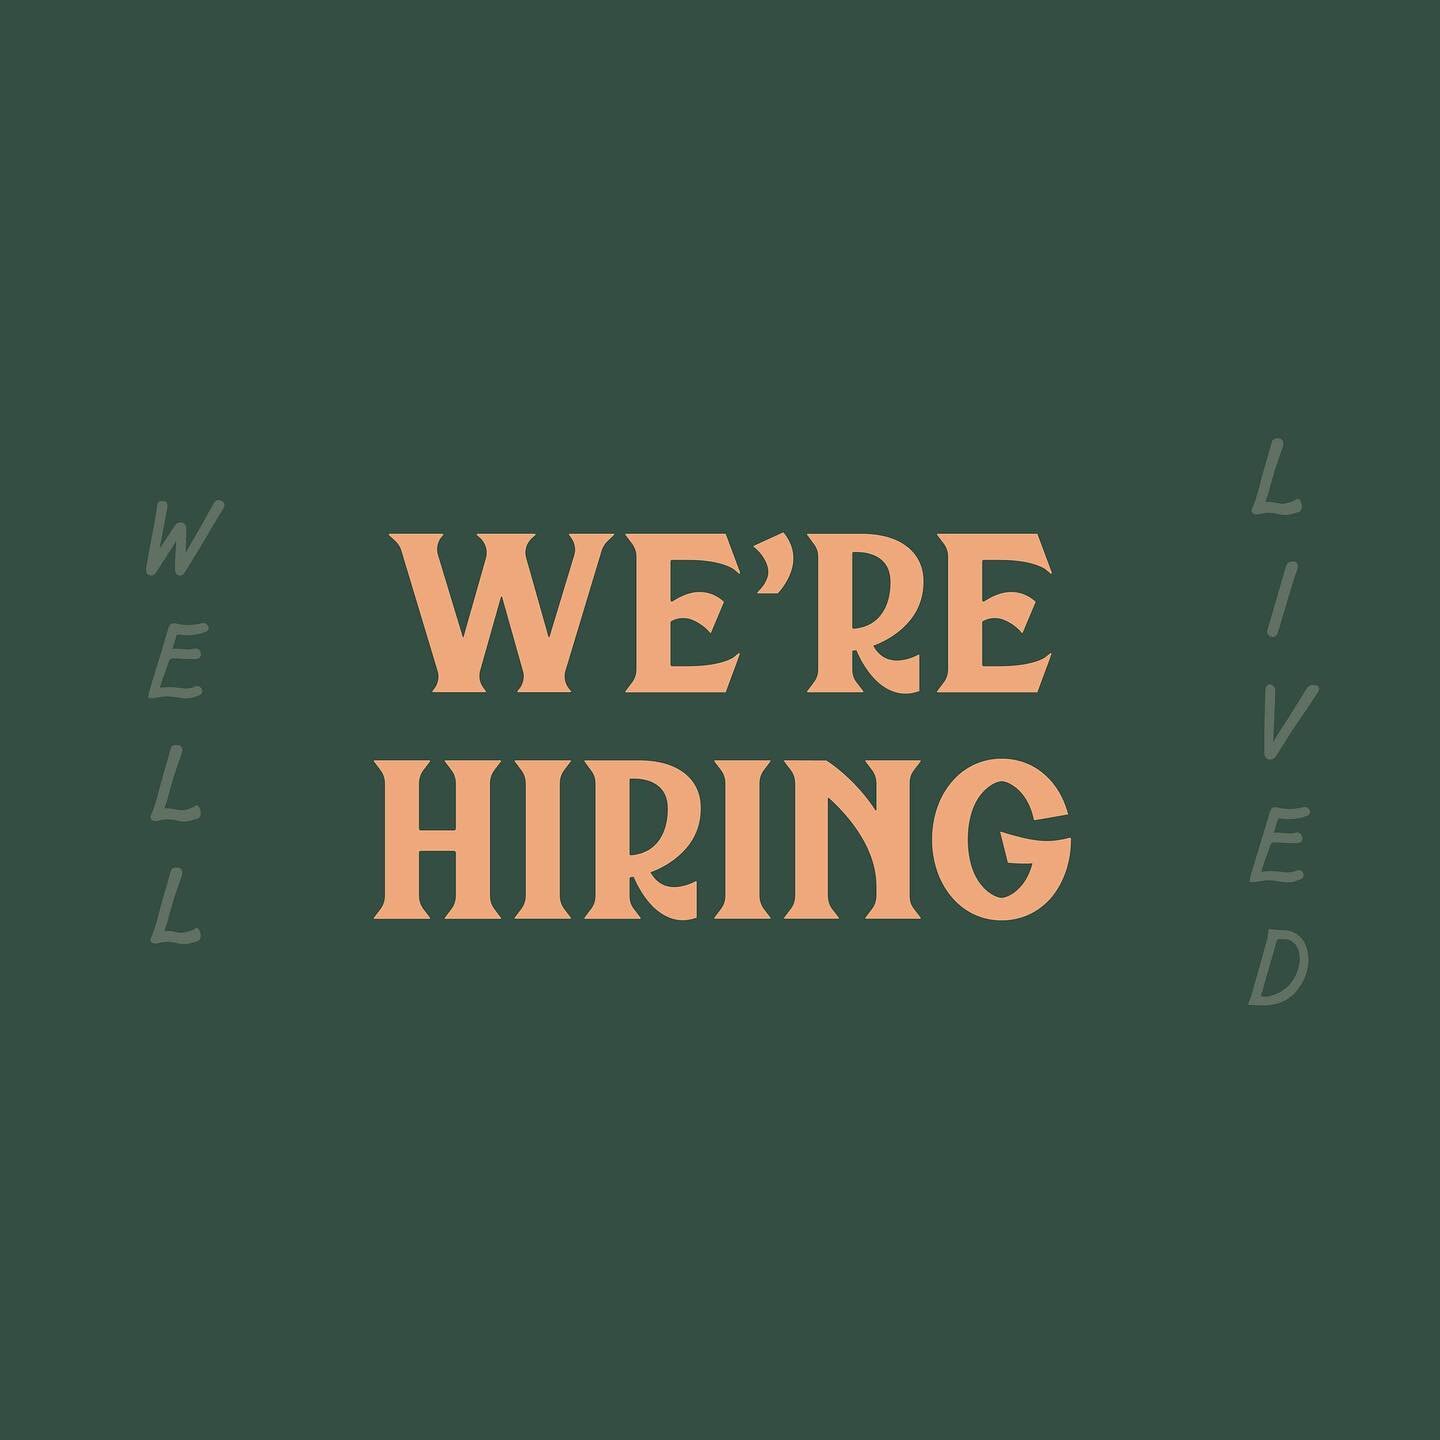 JOIN OUR TEAM!

We&rsquo;re growing and we are looking for awesome humans to grow with us. Head over to our website for all the details!